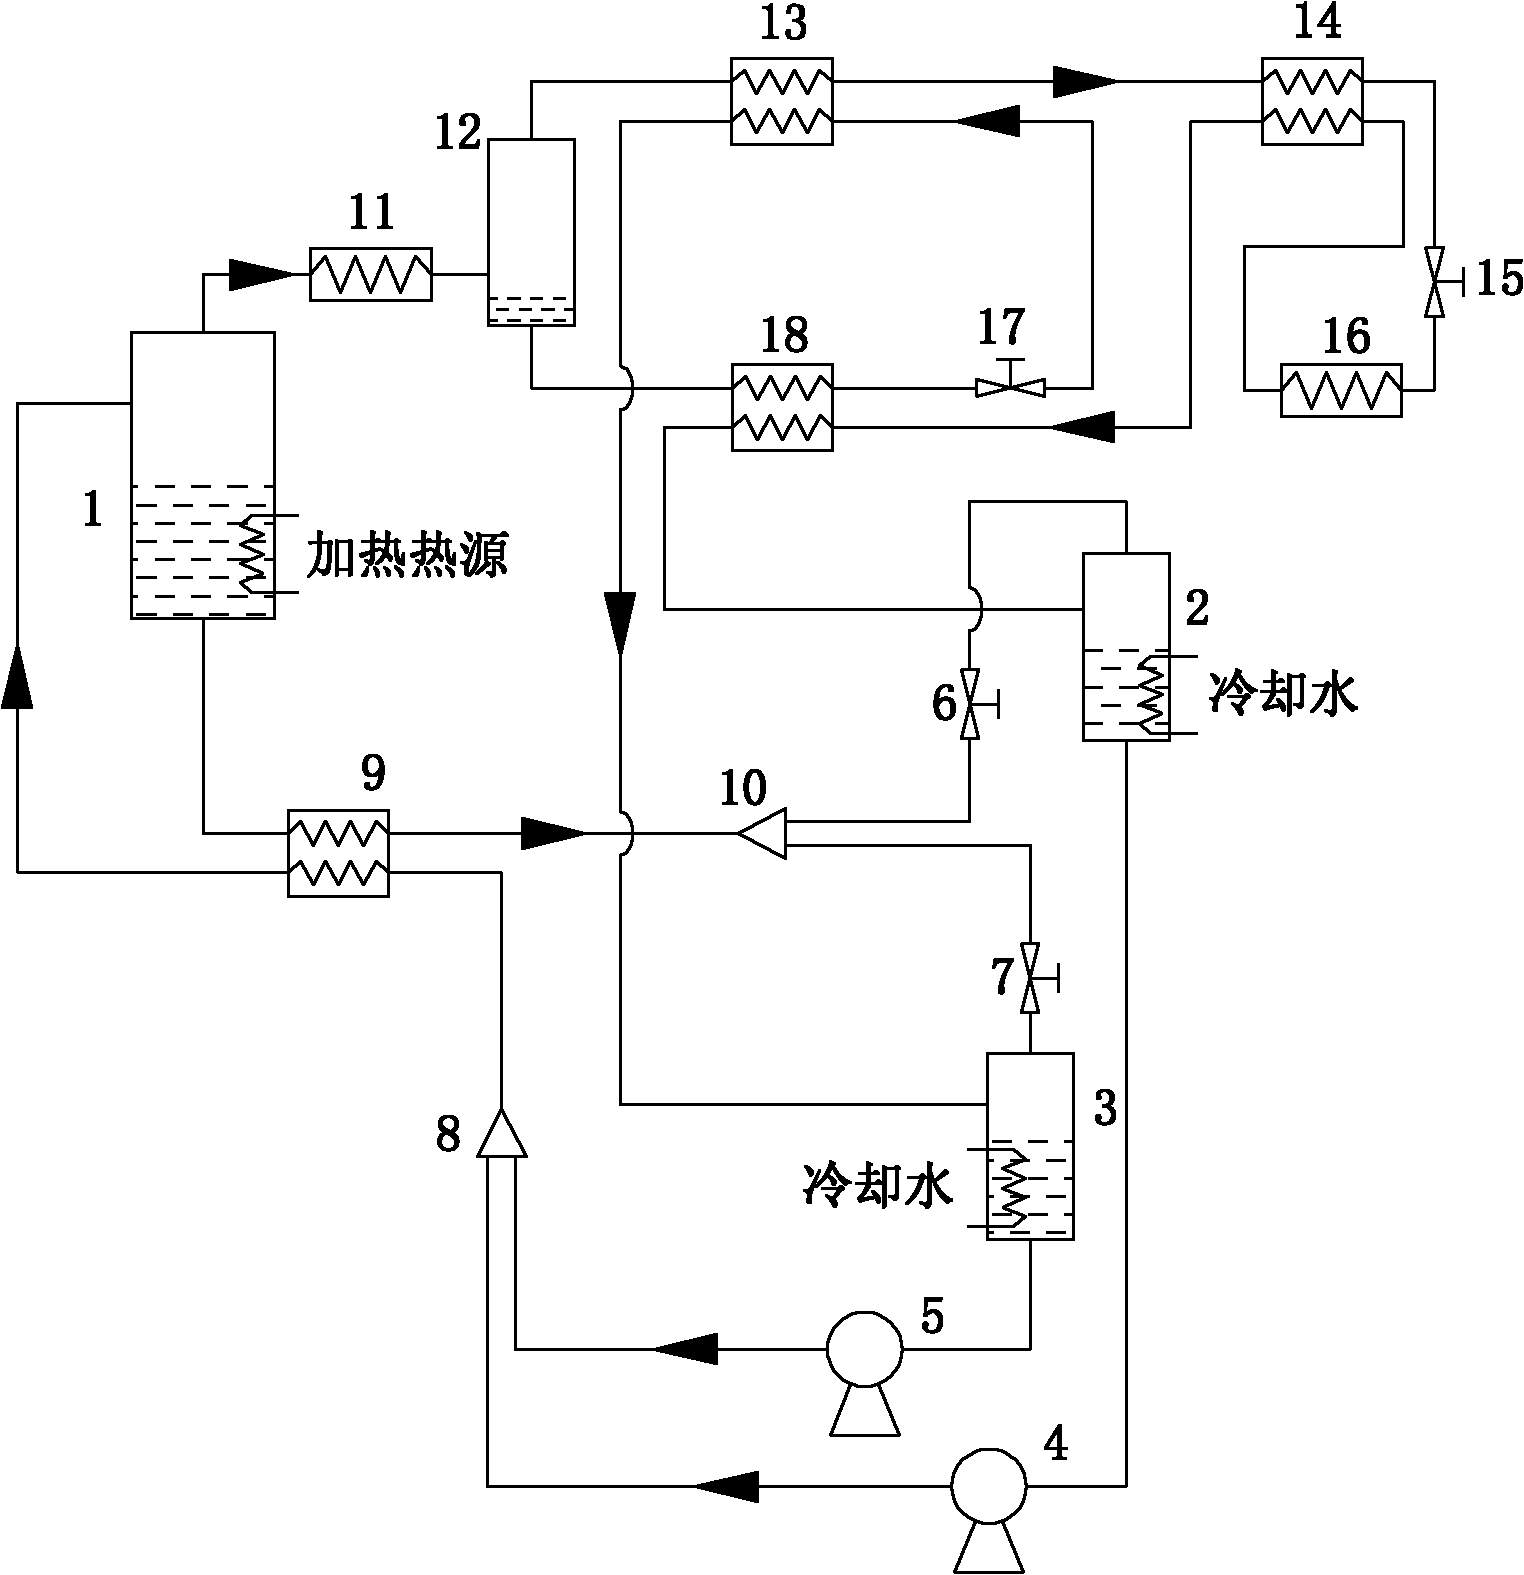 Low-temperature refrigerator with double-absorber